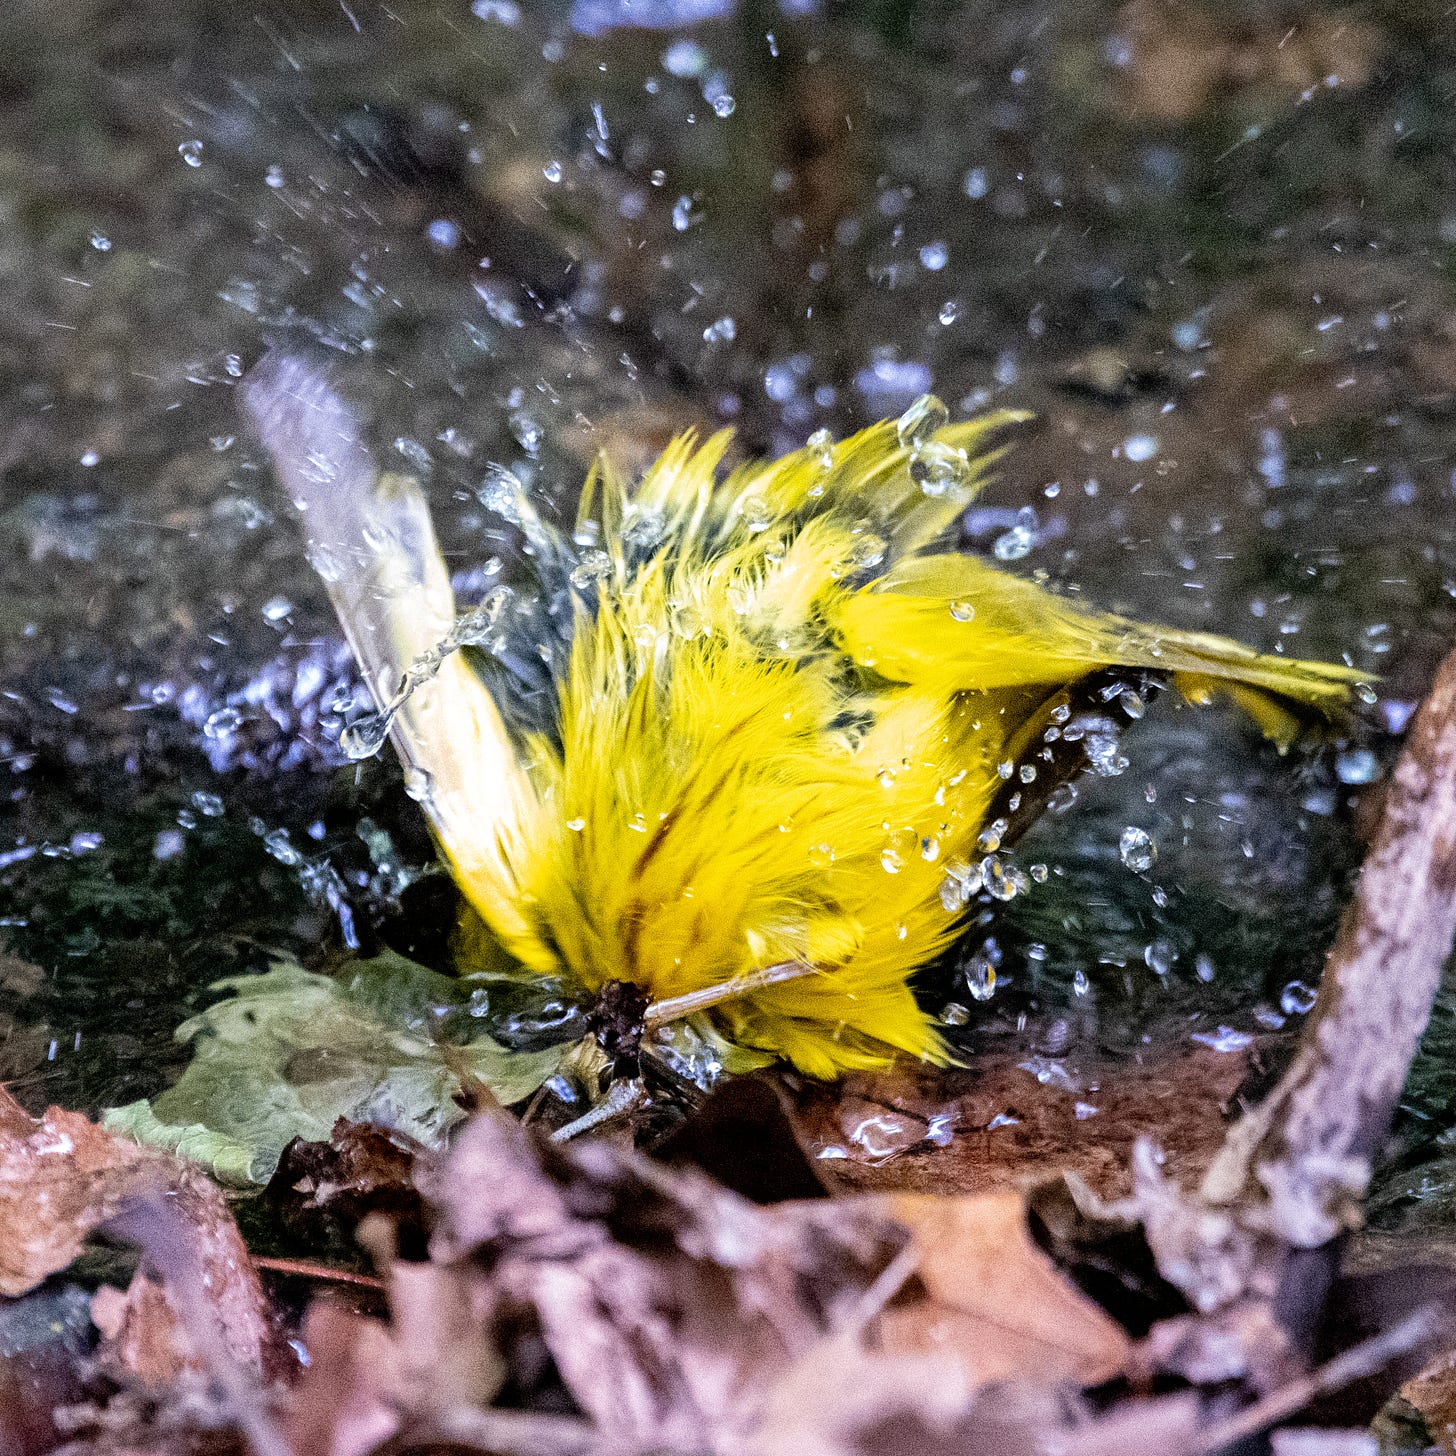 A yellow warbler submerging itself in a creek